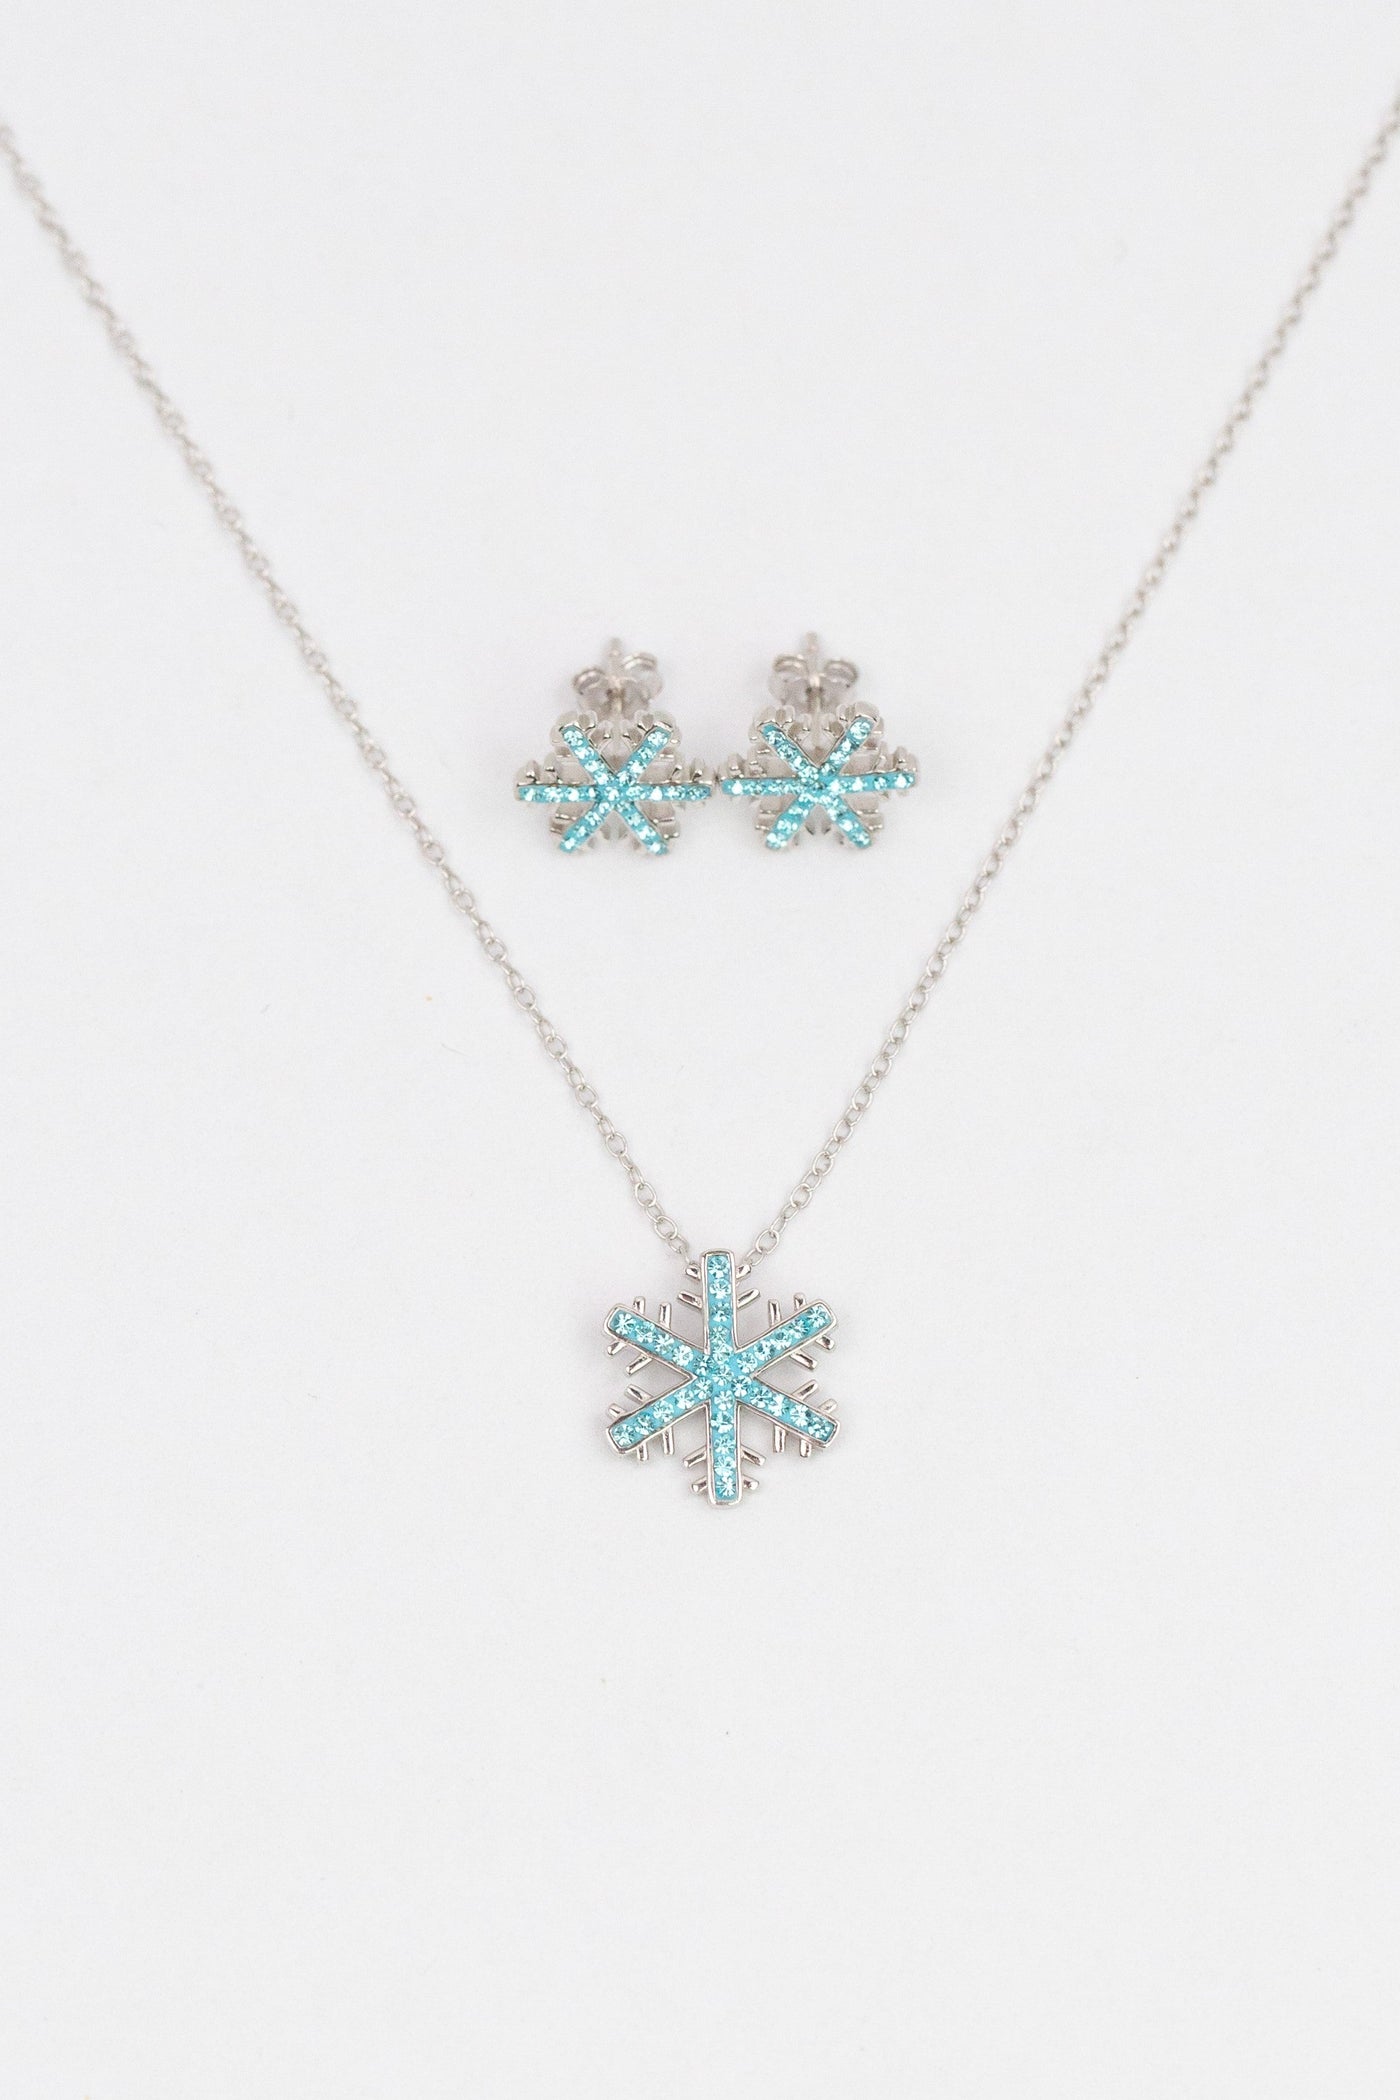 Snowflake (Sectored) Holiday Crystal Silver Pendant Necklace in Indicolite Match Set | Annie and Sisters